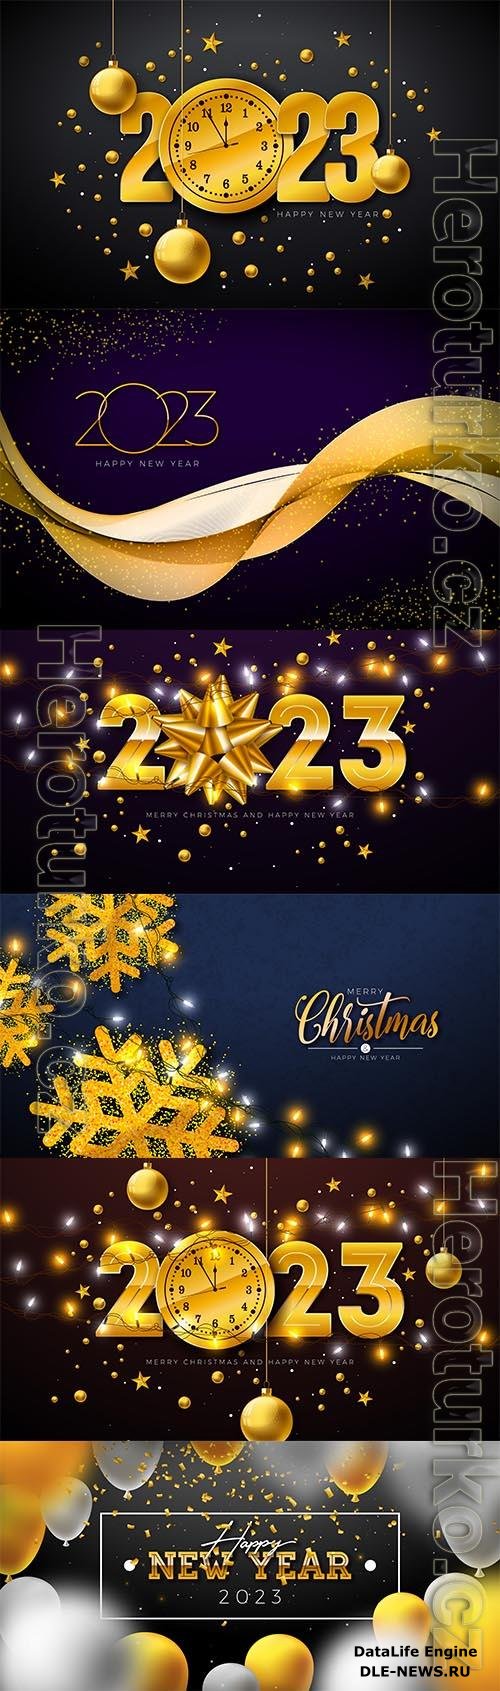 Happy new year 2023 illustration with gold number clock and ornamental glass ball on dark background